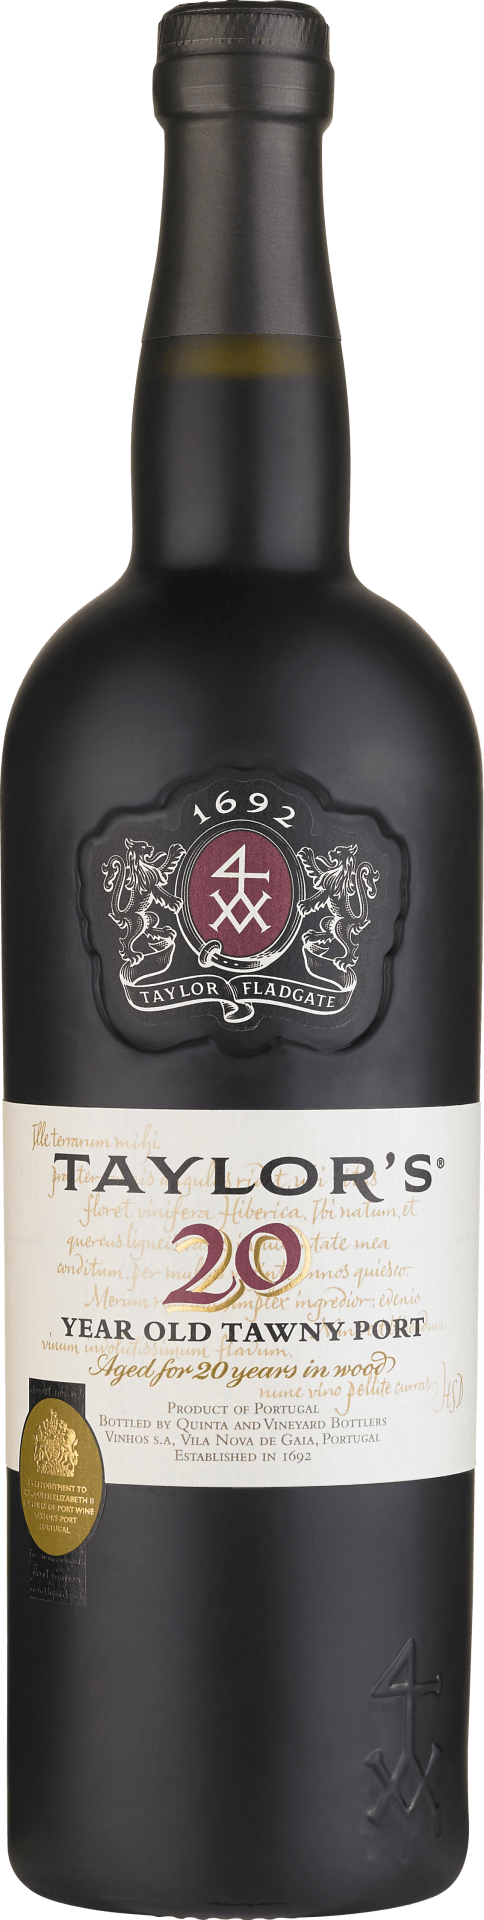 Taylor’s Port Tawny 20 Years Old - 0.75 l